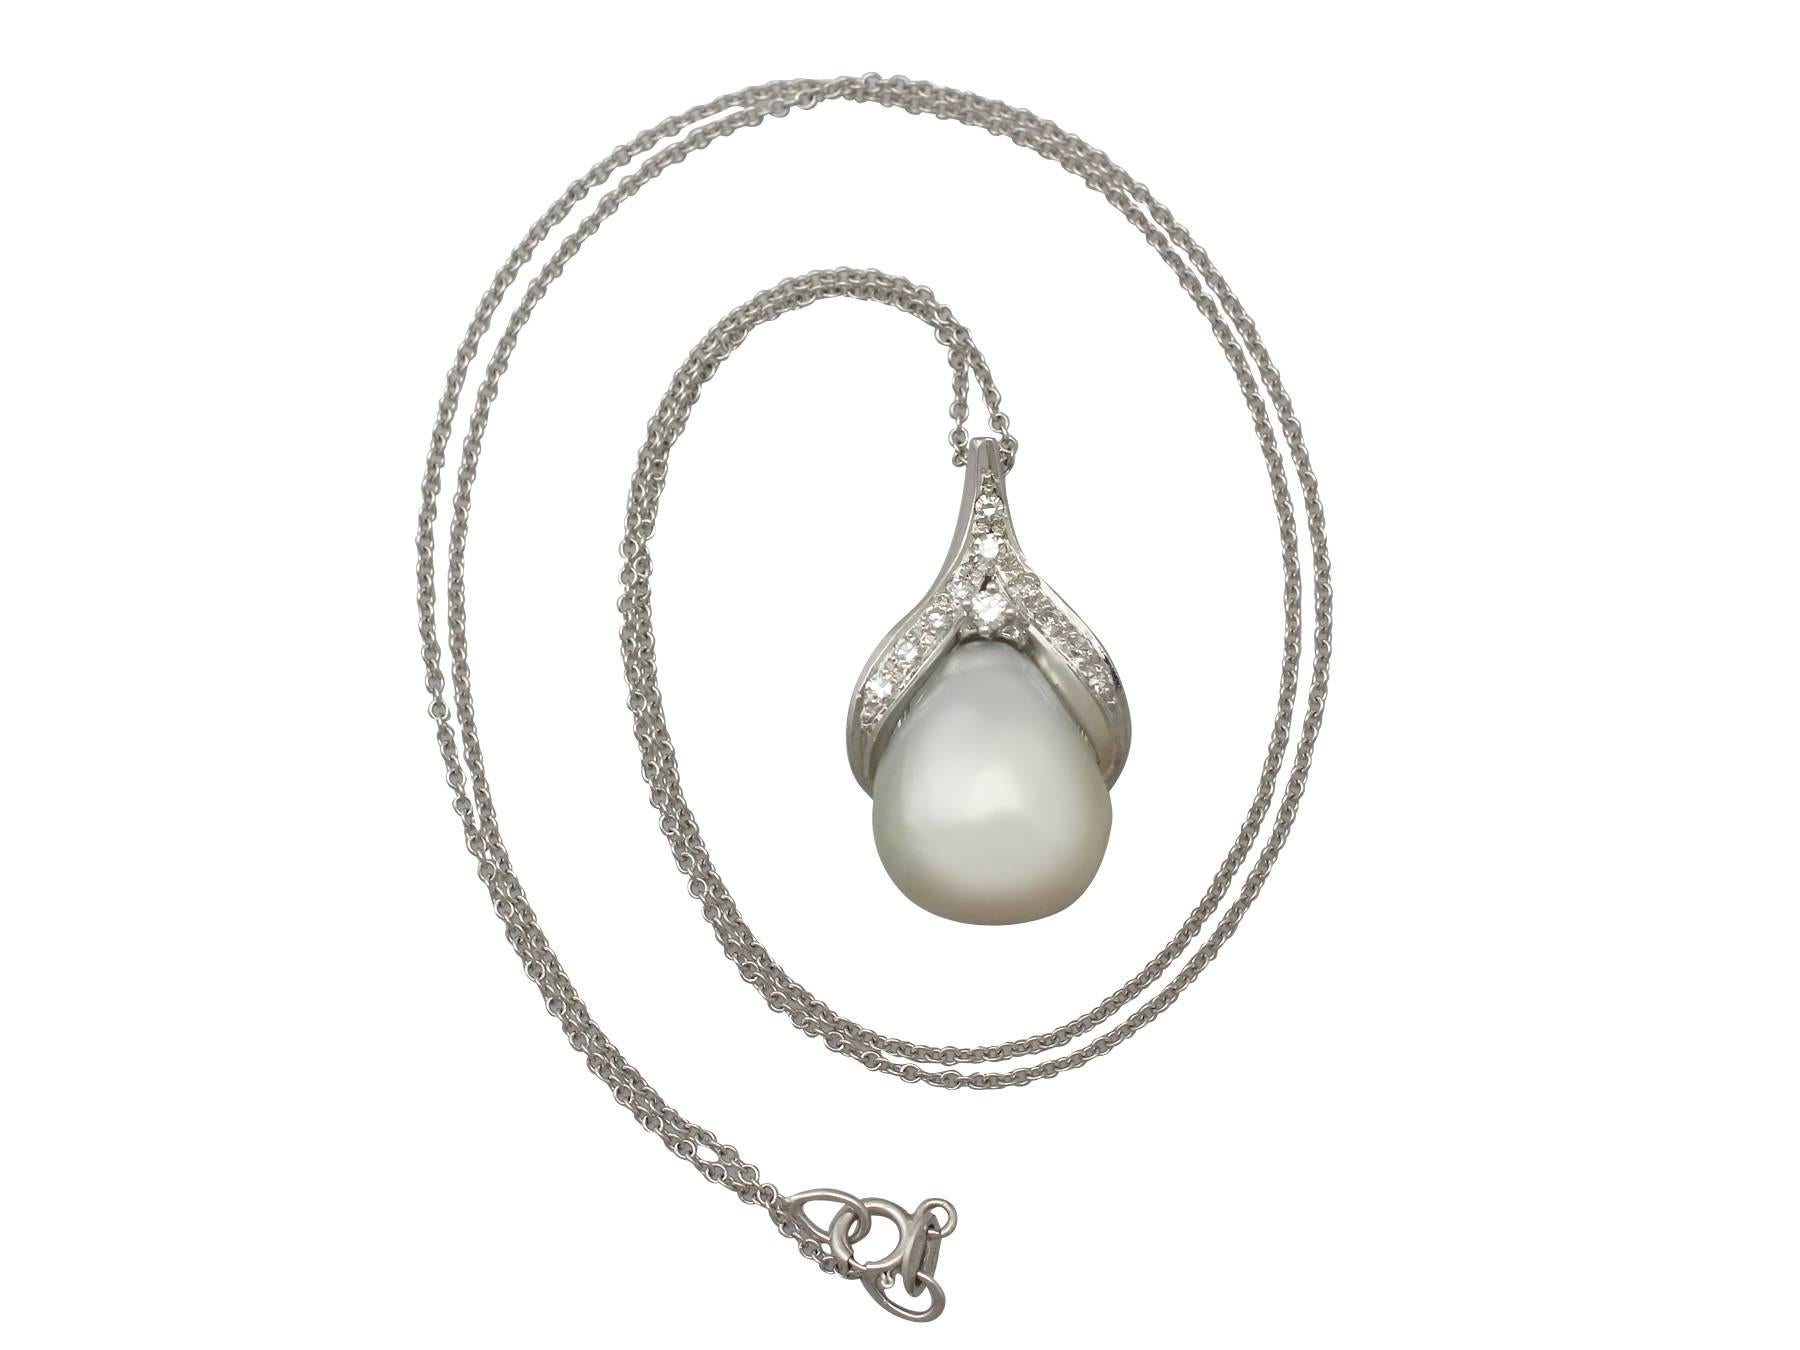 A fine and impressive vintage blister pearl and 0.36 carat diamond, 18 karat white gold pendant; part of our diverse vintage jewelry and estate jewelry collections

This fine and impressive vintage blister pearl pendant has been crafted in 18 k